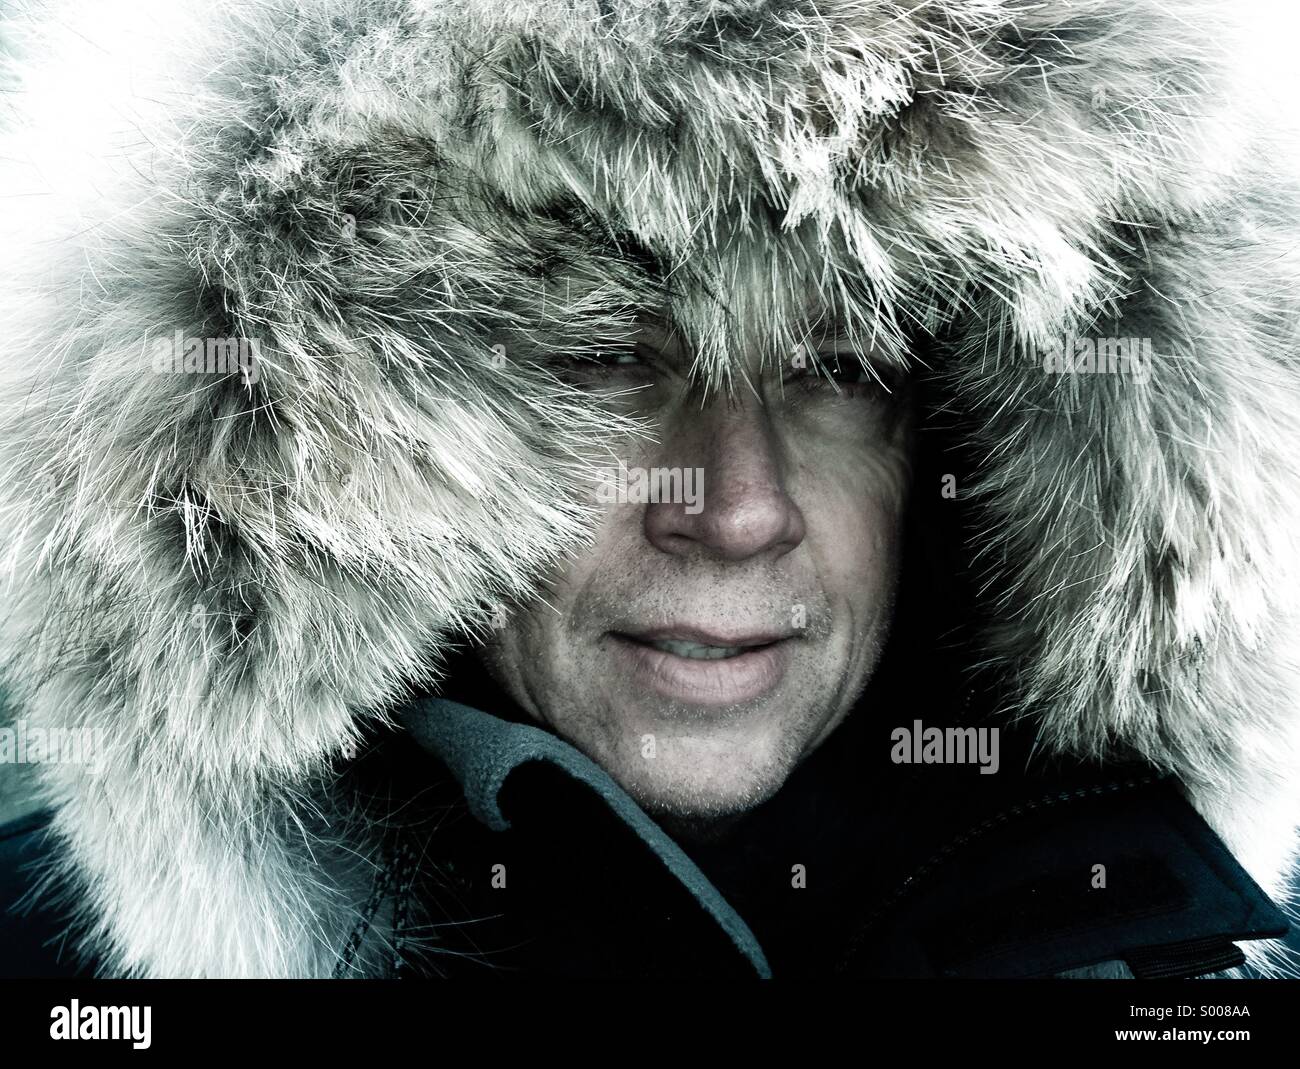 Arctic explorer braces himself against the weather extremes. Stock Photo